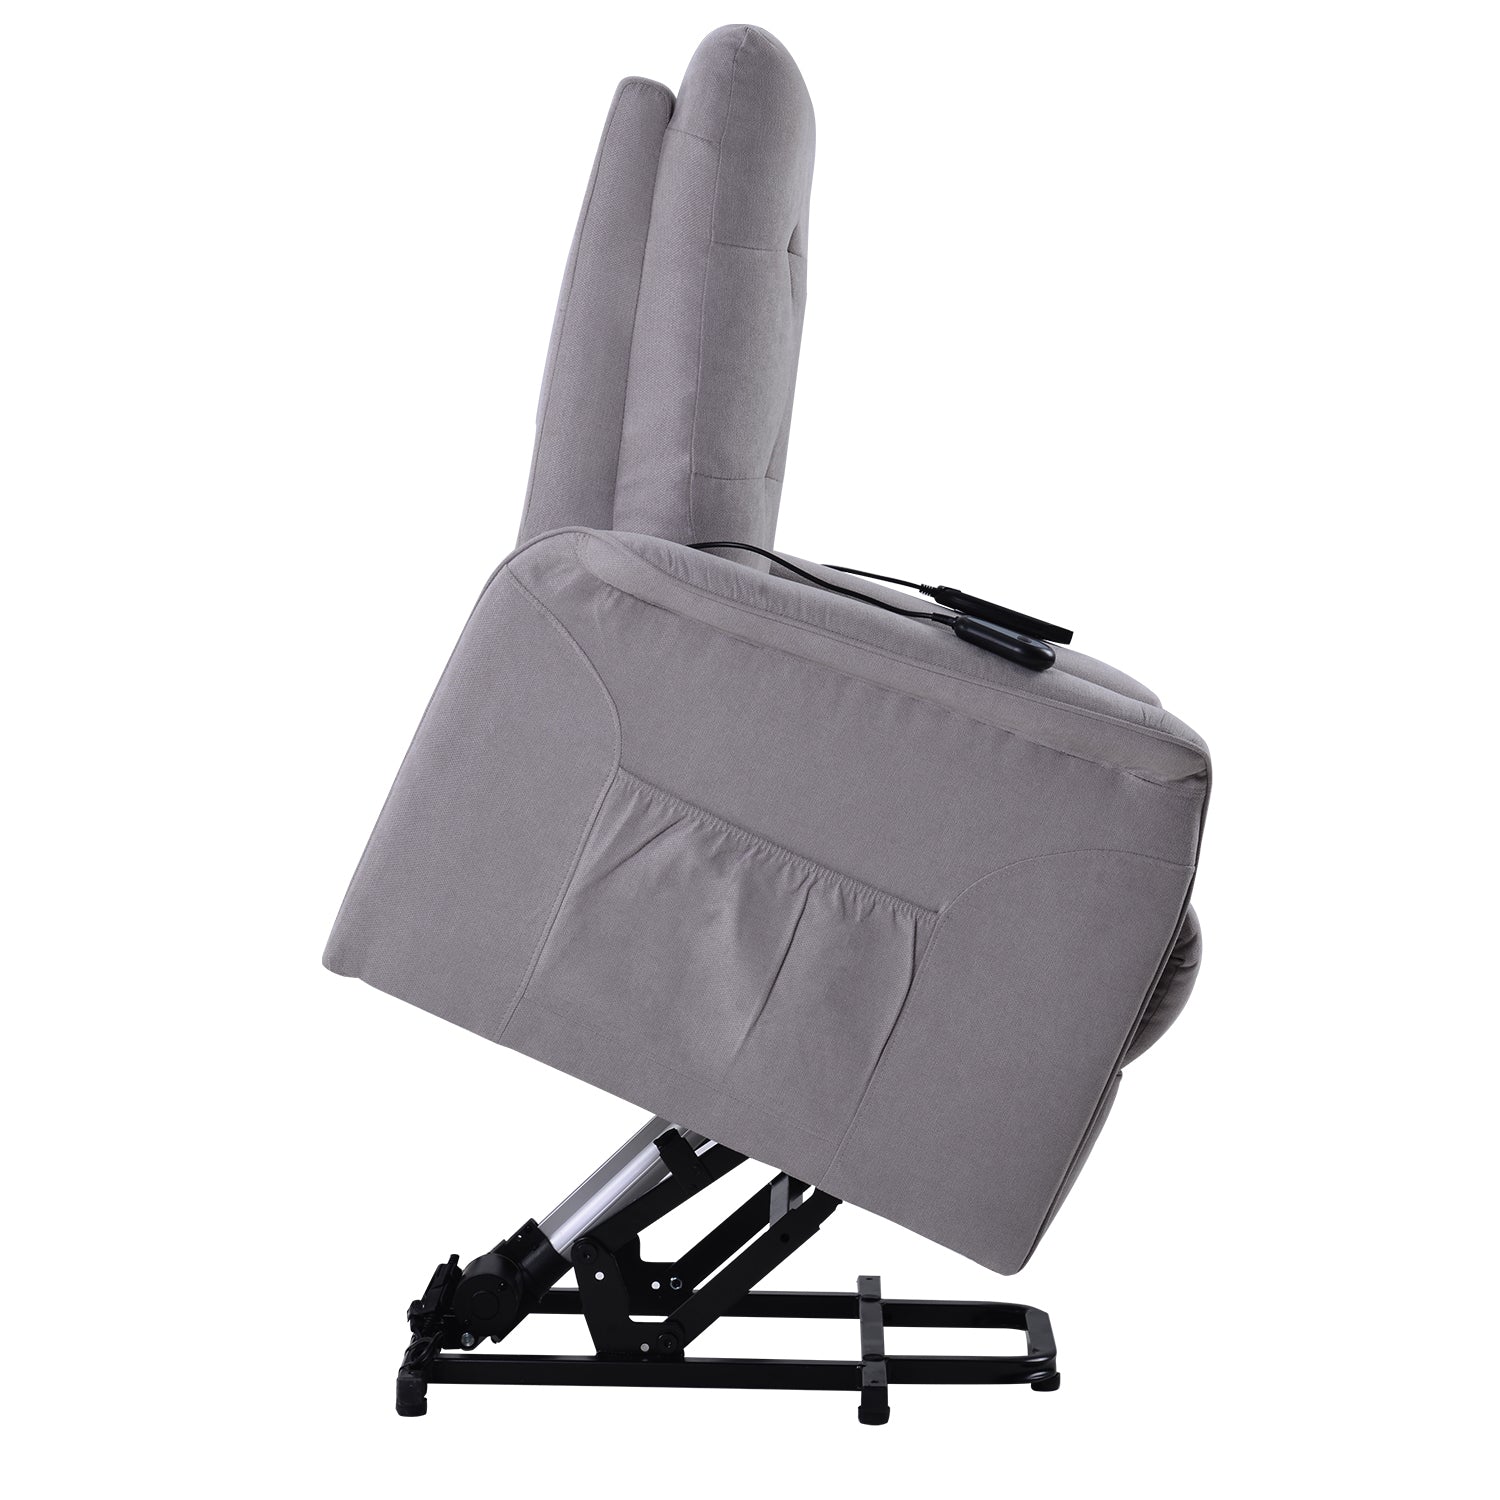 Power Lift Chair Recliner with Adjustable Massage, side view lifted